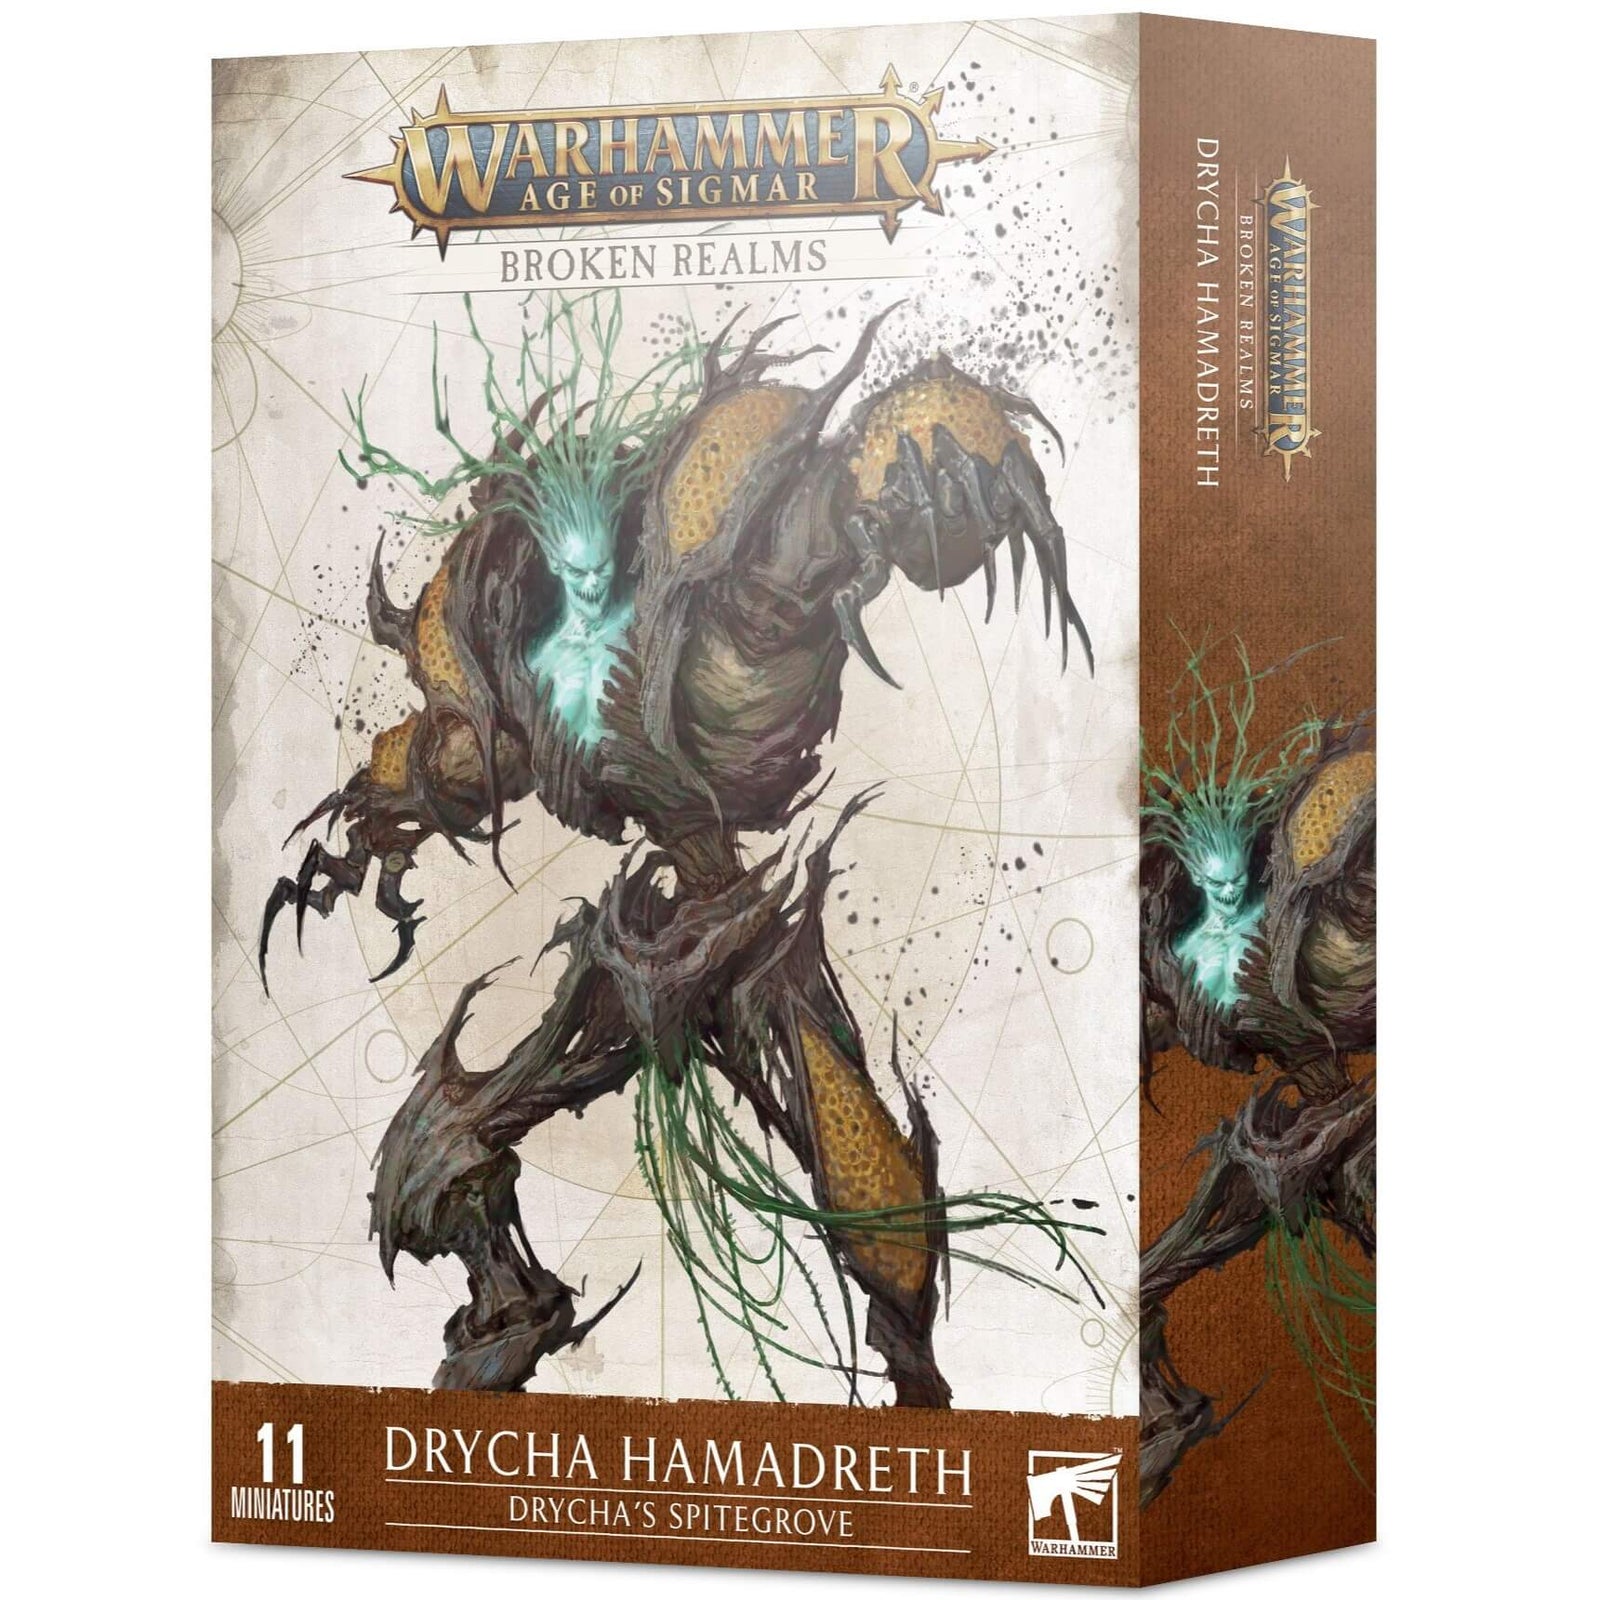 Product Image for AoS Broken Realms Drycha's Spitegrove